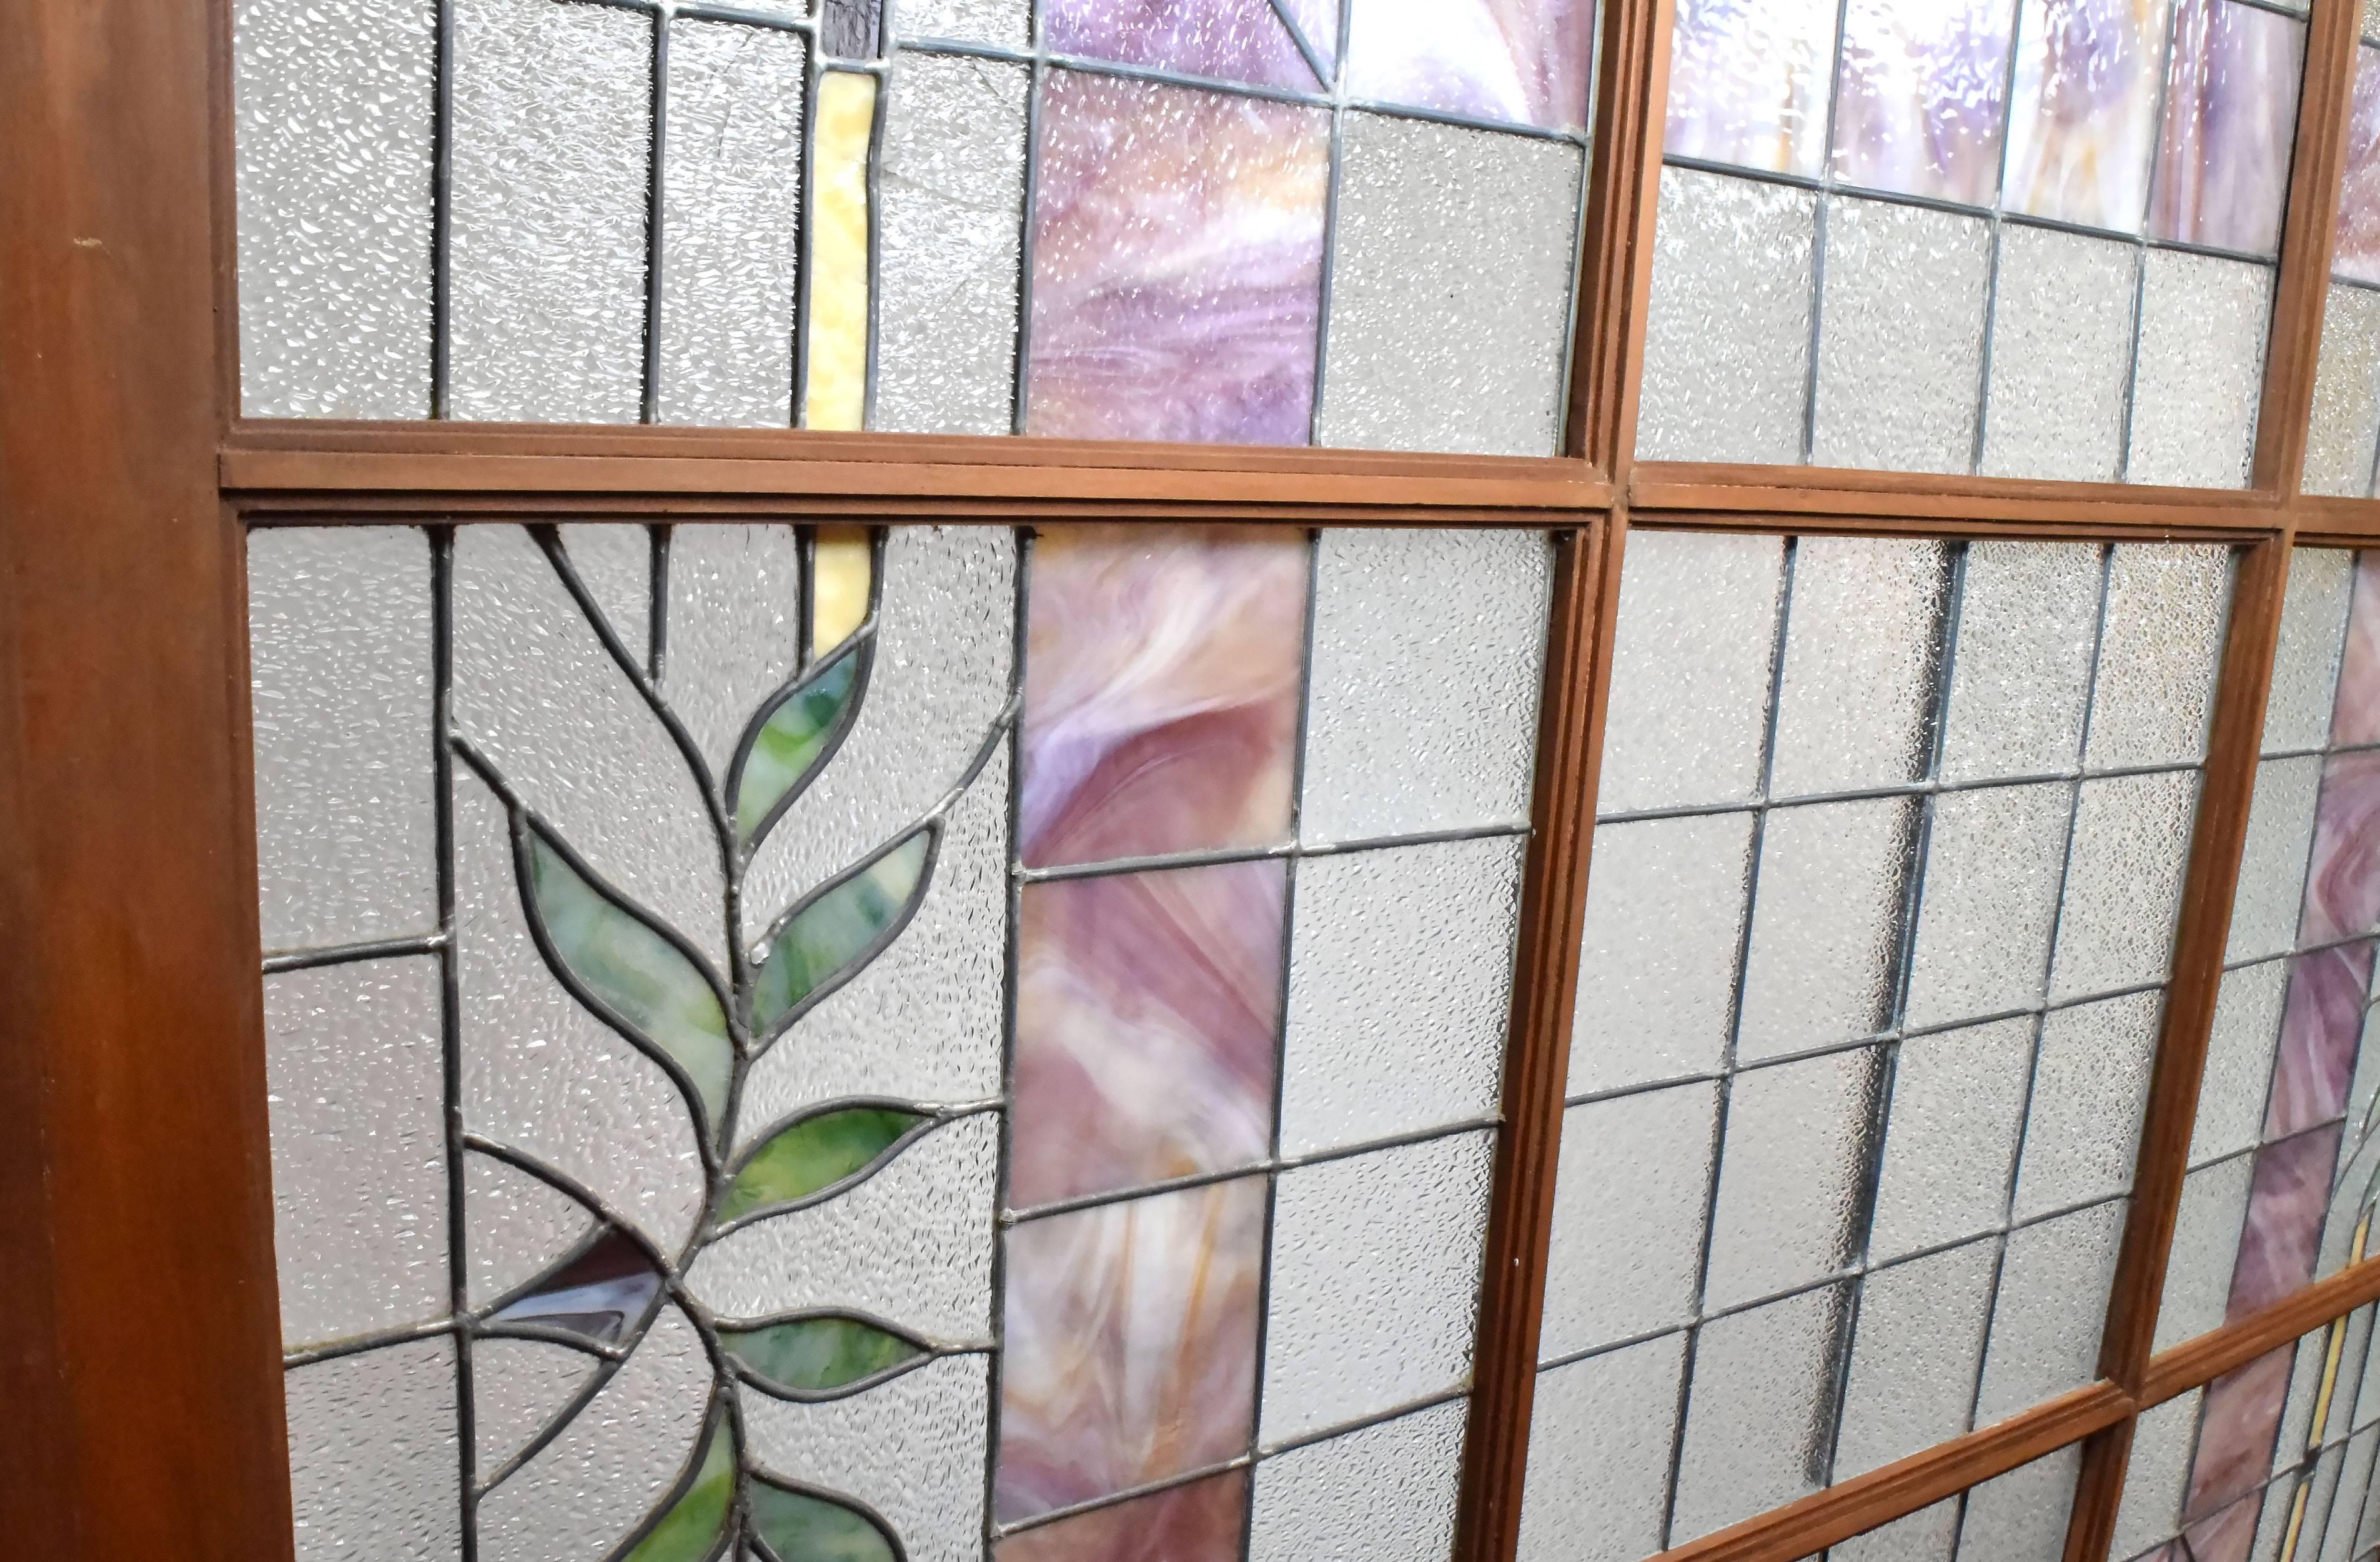 This is an incredible stained glass skylight that spans nearly six feet across. Marbled mauve and coral colored slag glass are surrounded by leafy and pleasing geometric designs, which come to life when lit from behind. The glass is separated into